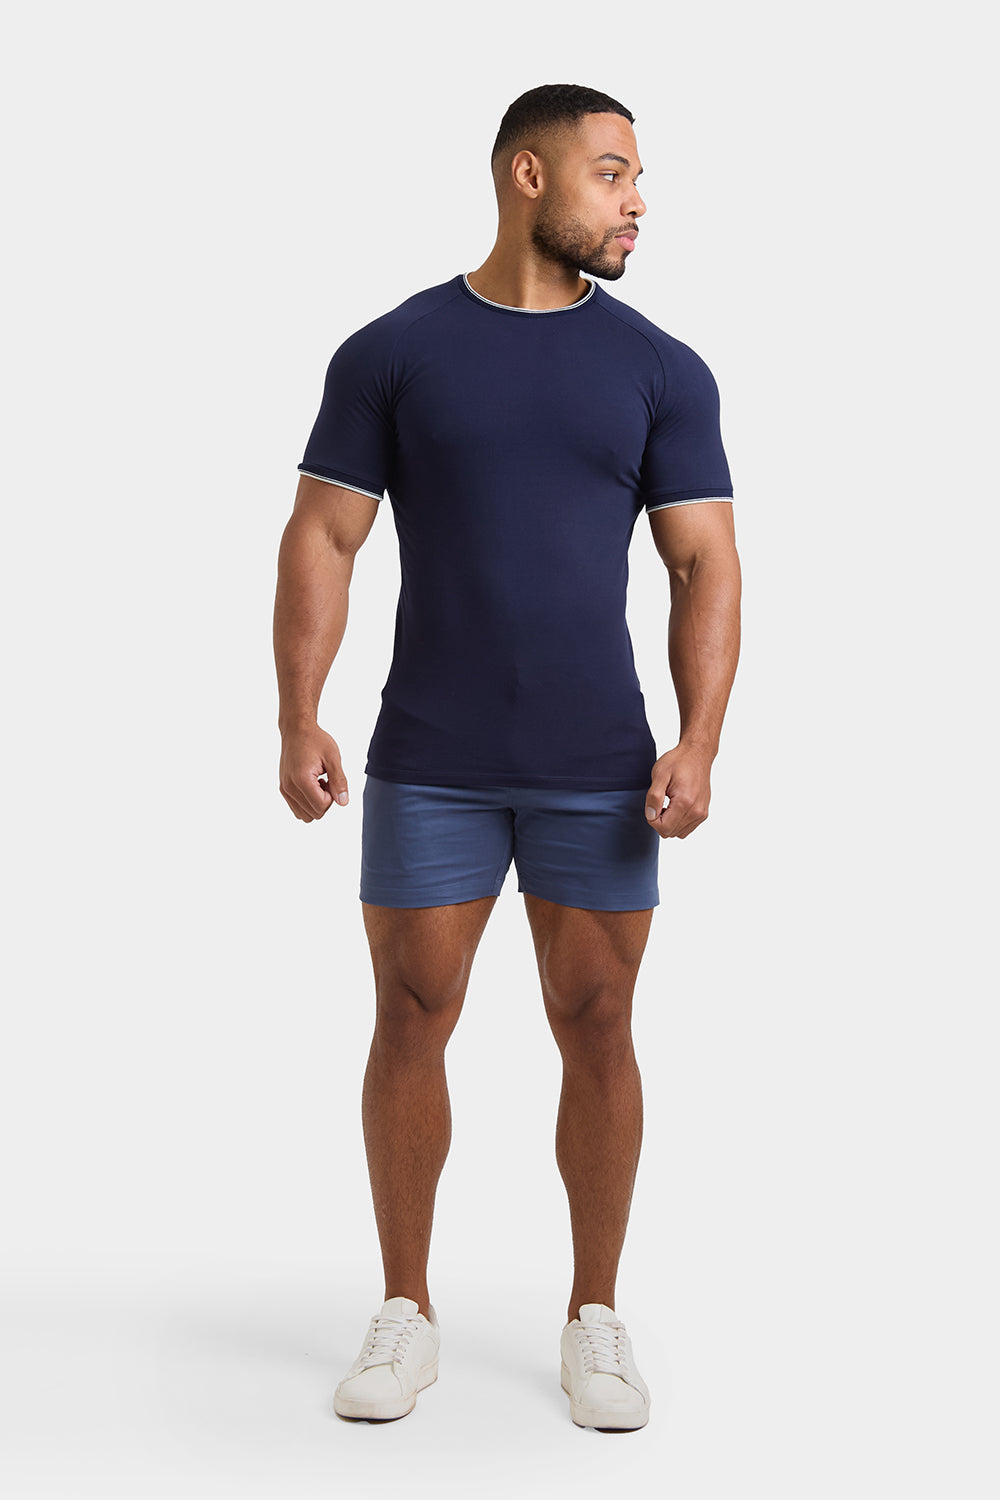 Tipped T-Shirt in Navy - TAILORED ATHLETE - ROW